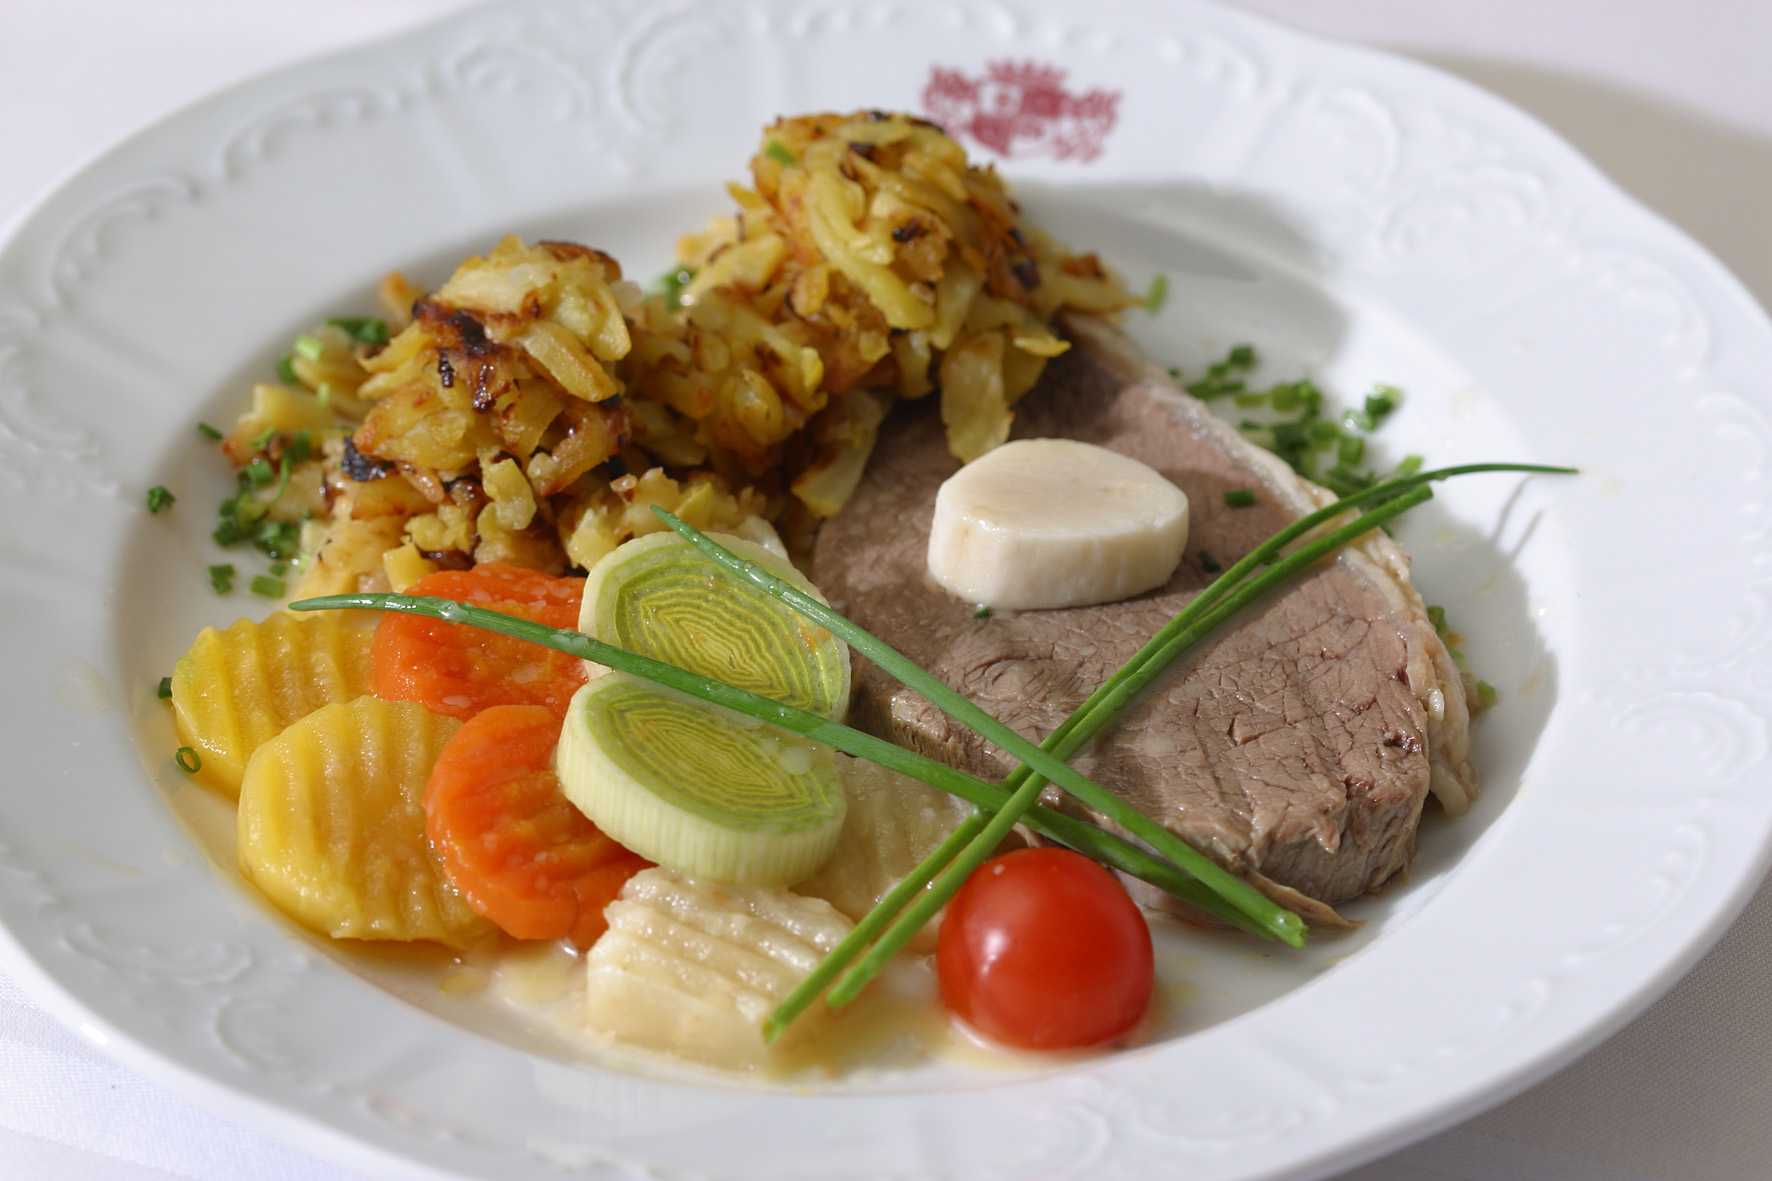 Viennese cuisine with history - Tafelspitz and Viennese beef - Vienna ...